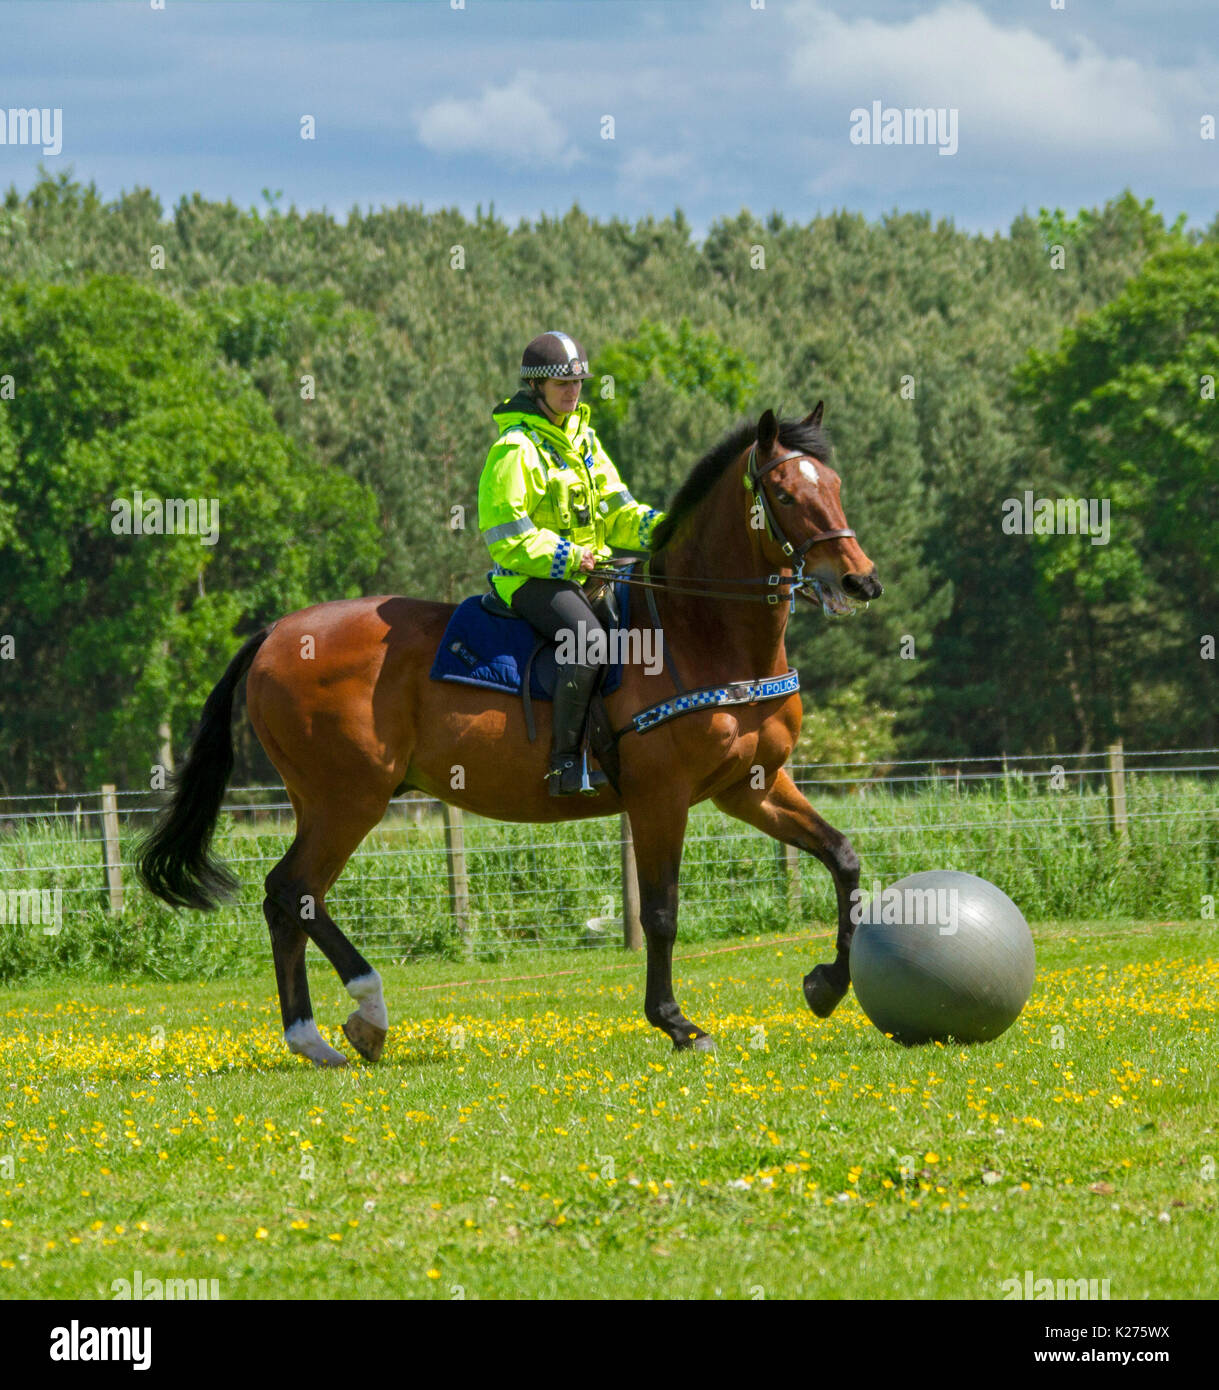 Police woman riding bay horse playing game of horse football in rural area near Etal in Northumberland, England Stock Photo